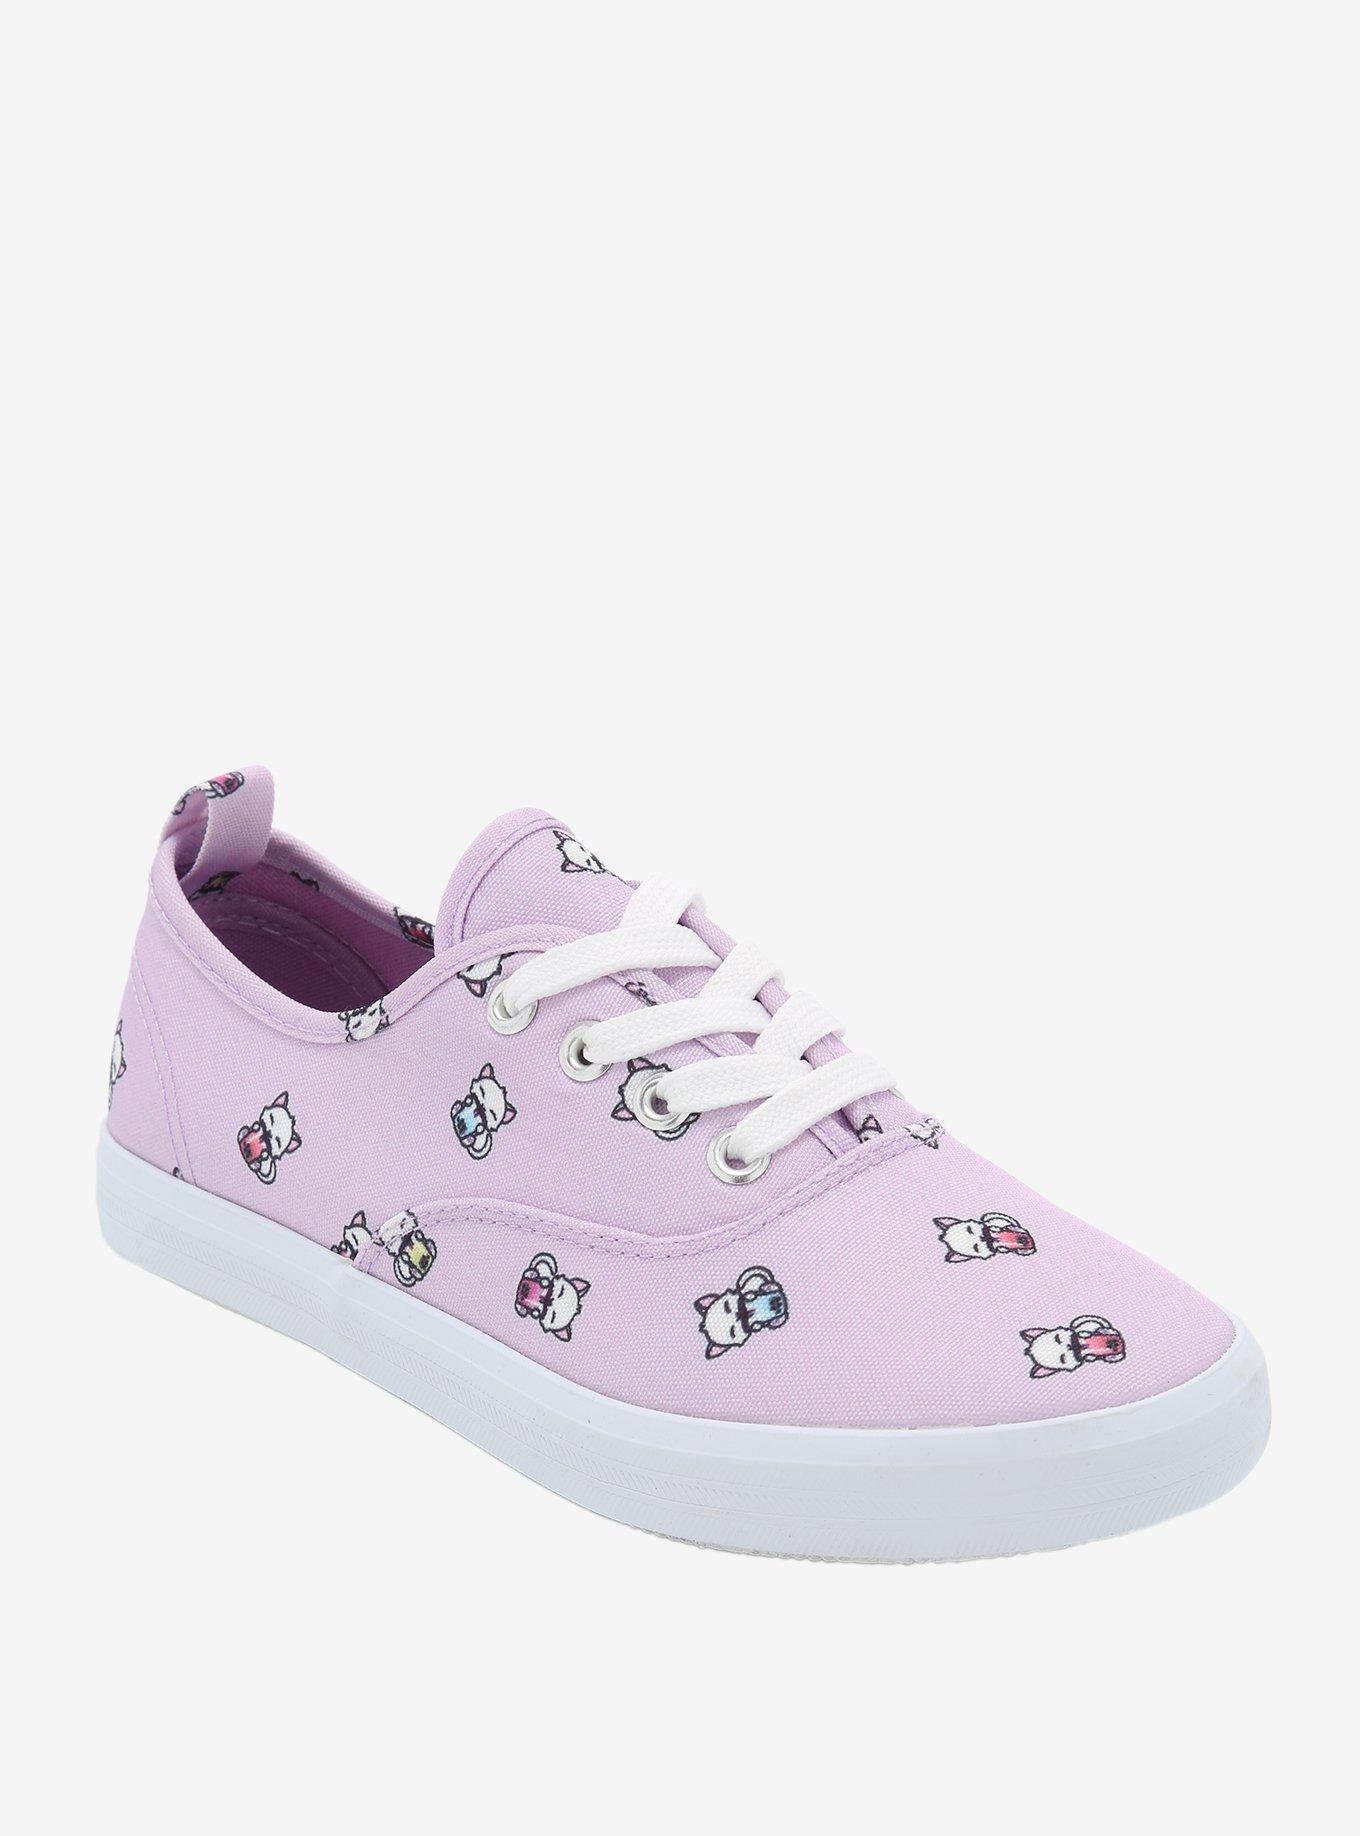 Boba Cats Lilac Lace-Up Sneakers, MULTI, hi-res